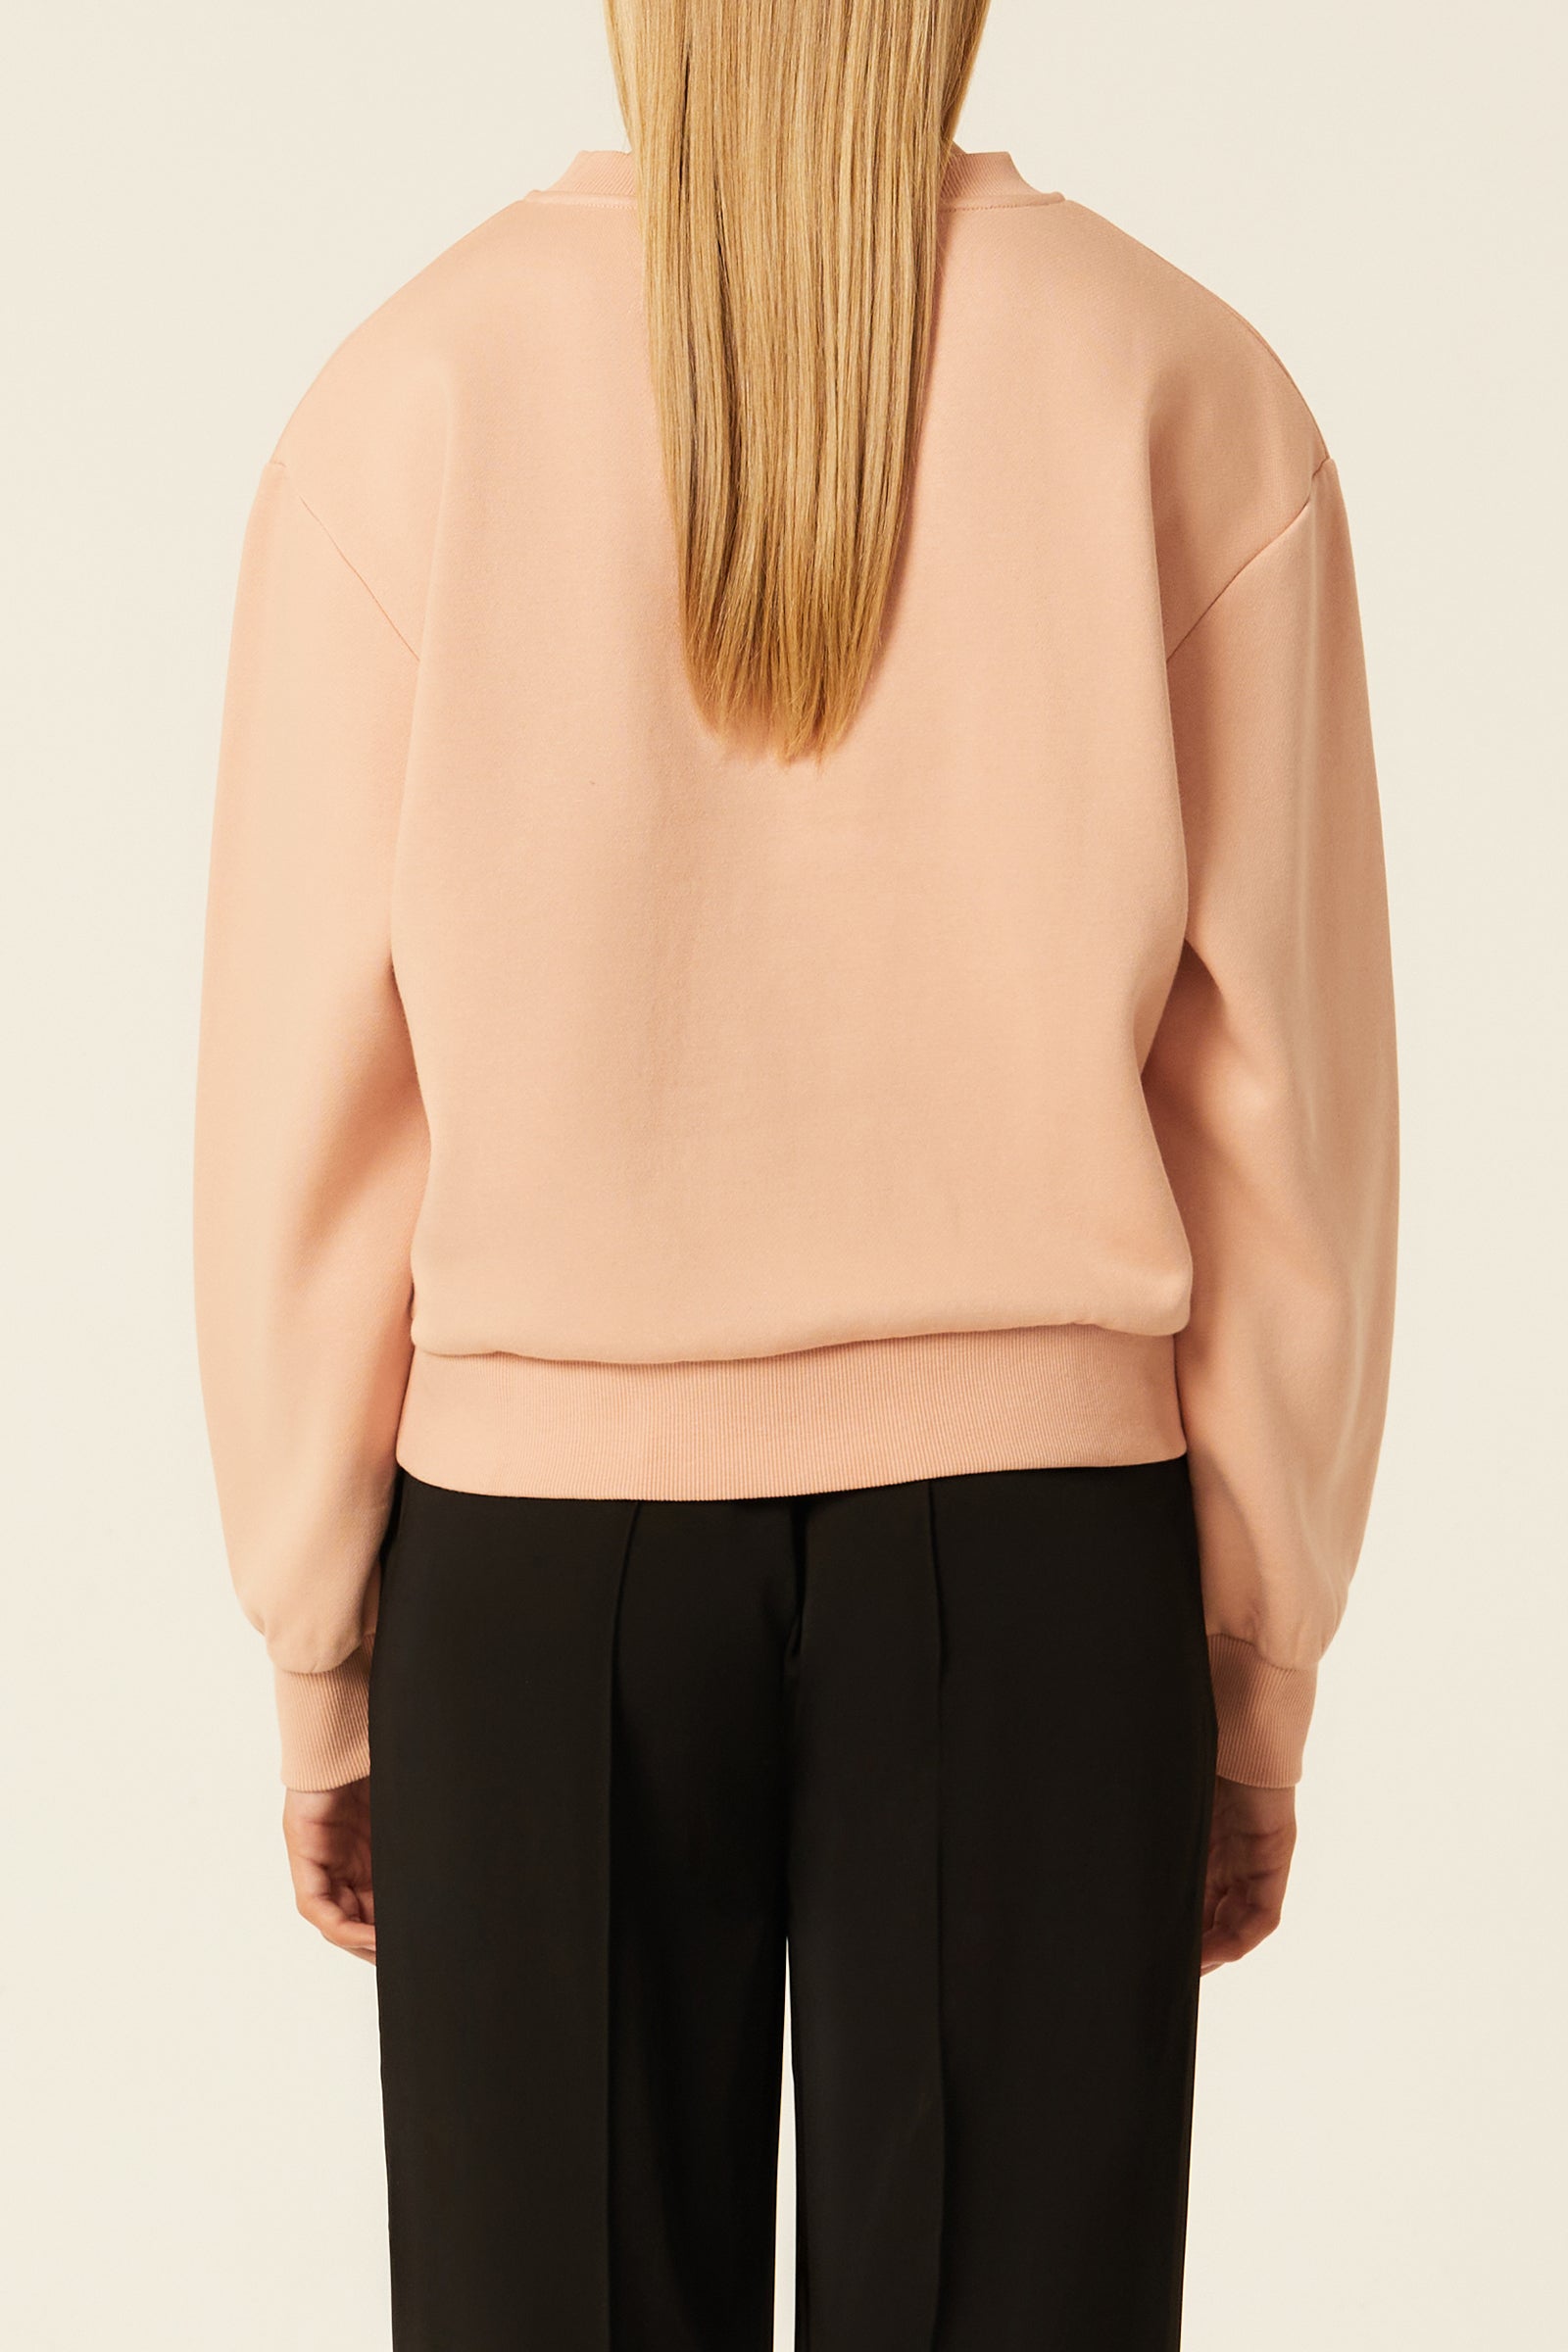 Nude Lucy Nude Classics Sweat in a Light Pink Guava Colour